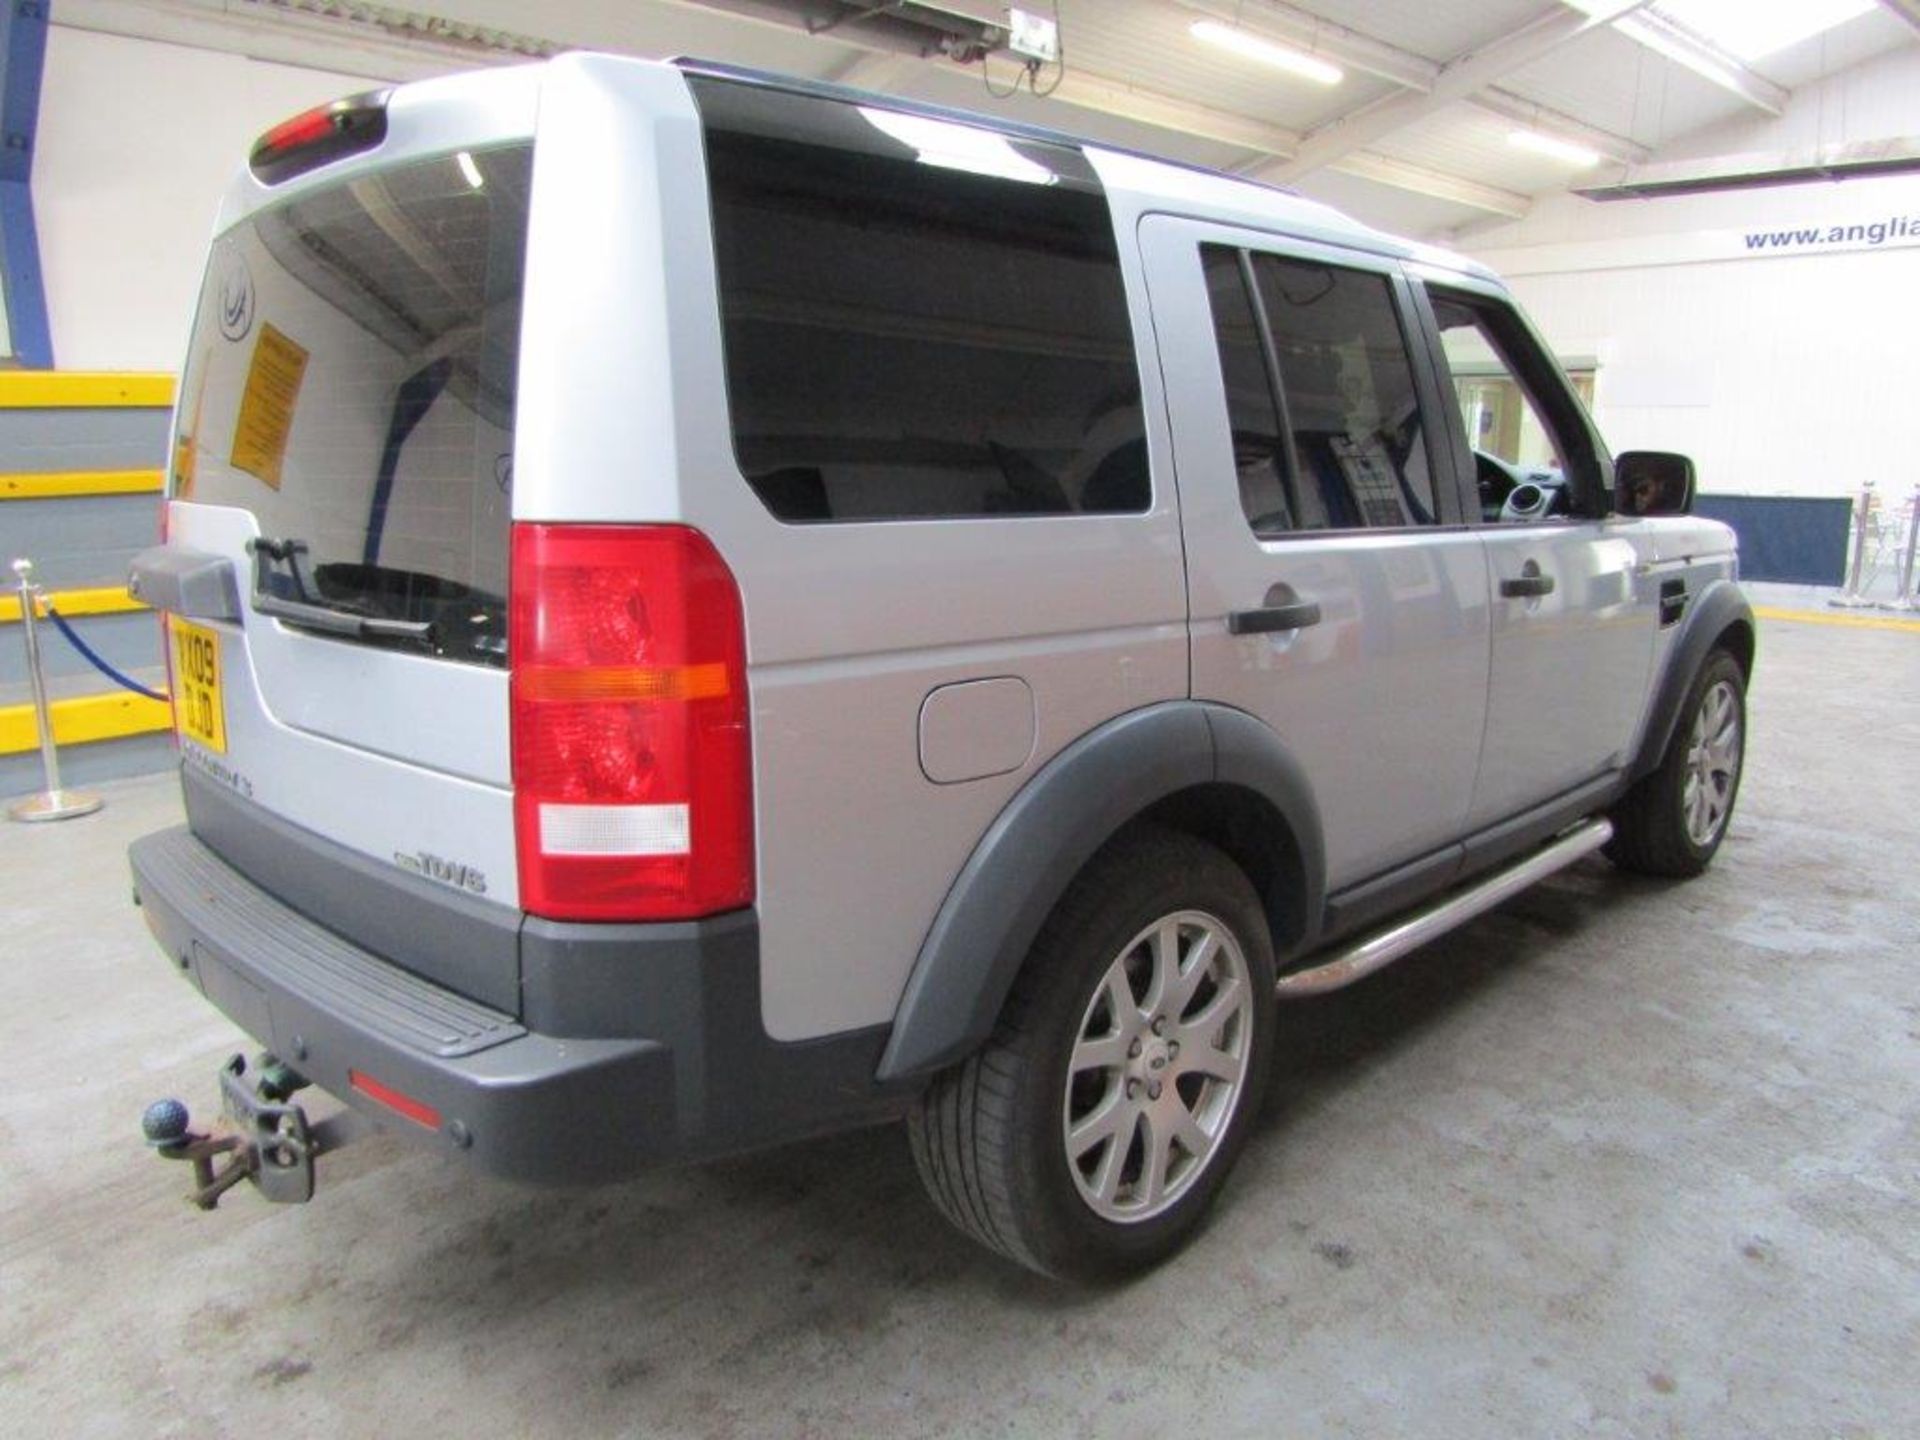 09 09 L/Rover Discovery Auto - Image 13 of 25